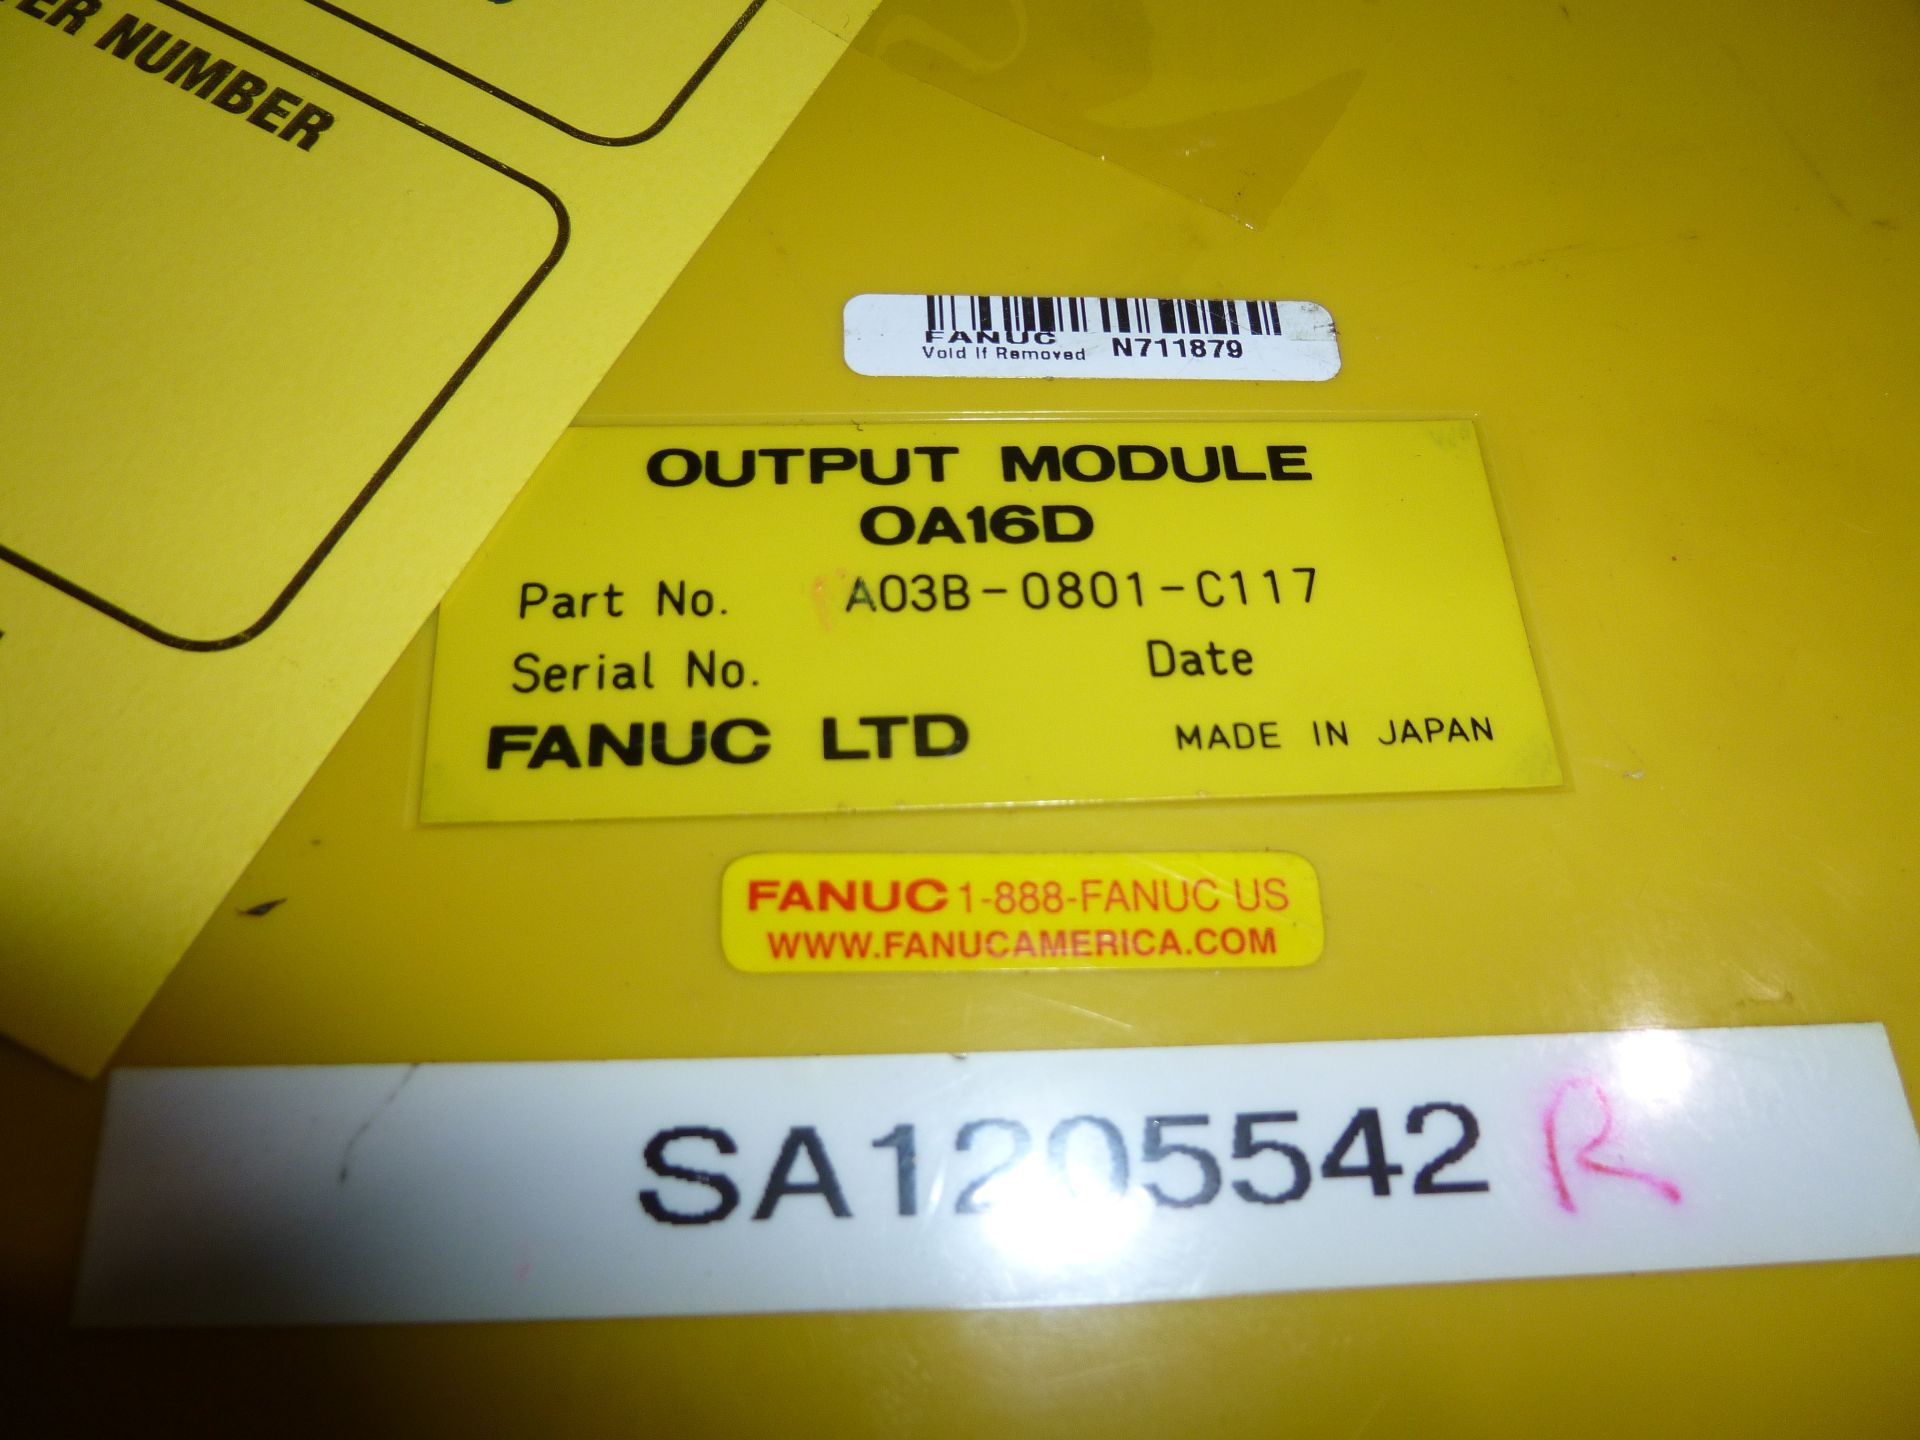 Qty 2 Fanuc output module model A03B-0801-C117, as always with Brolyn LLC auctions, all lots can - Image 3 of 3